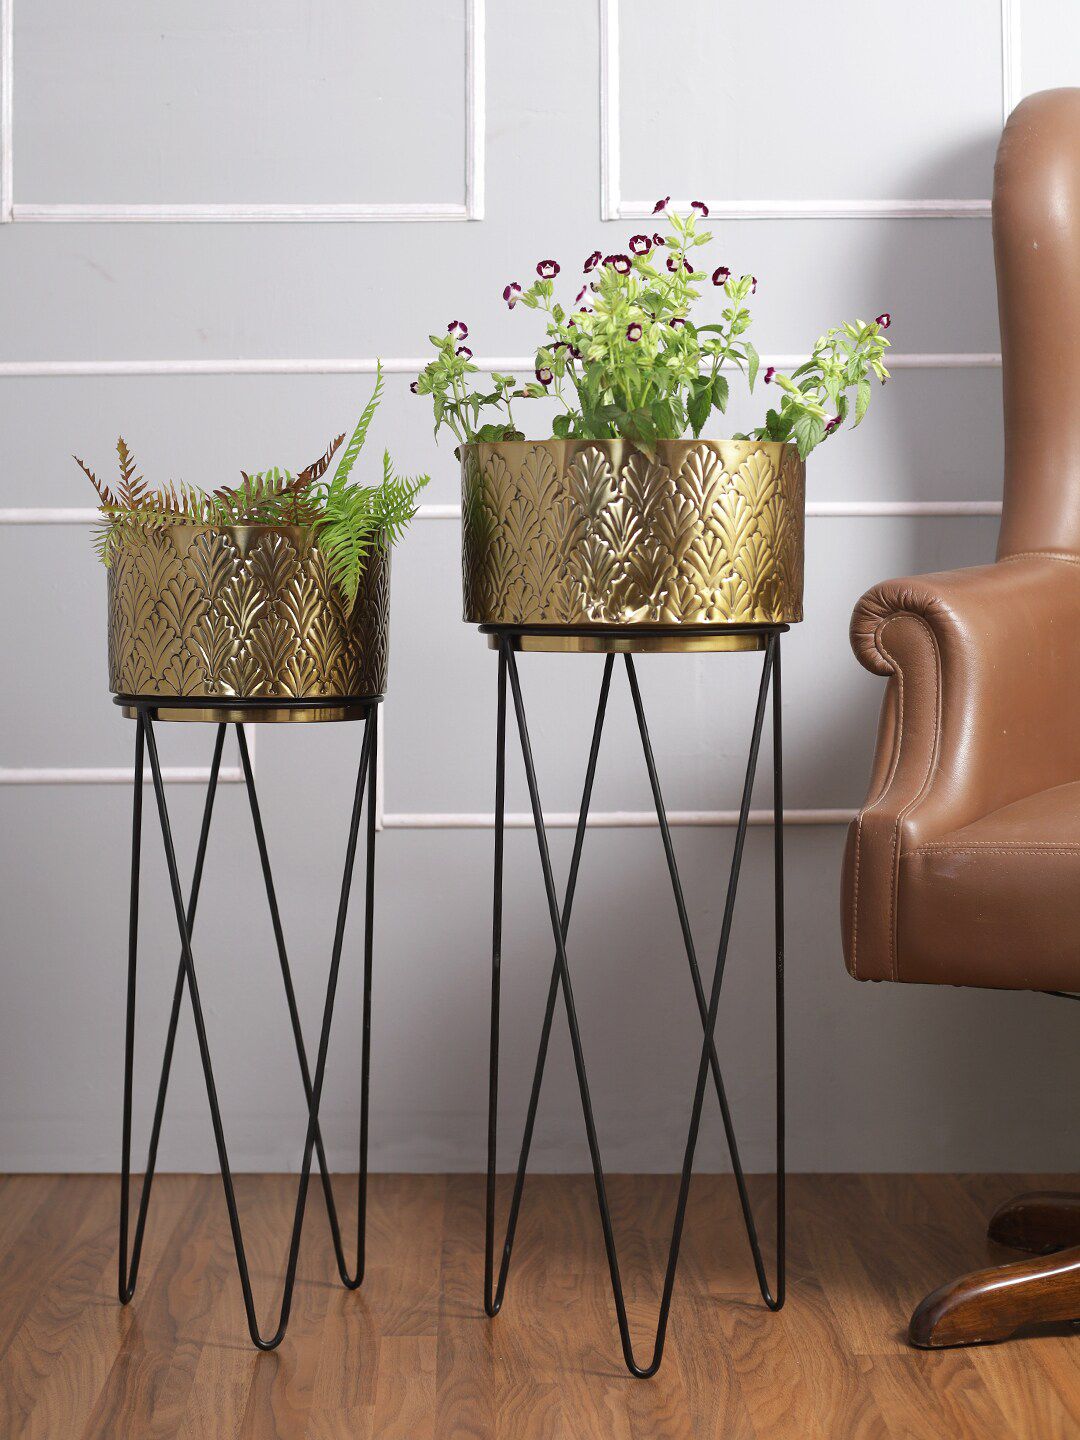 Aapno Rajasthan Set of 2 Planters With Stand Price in India